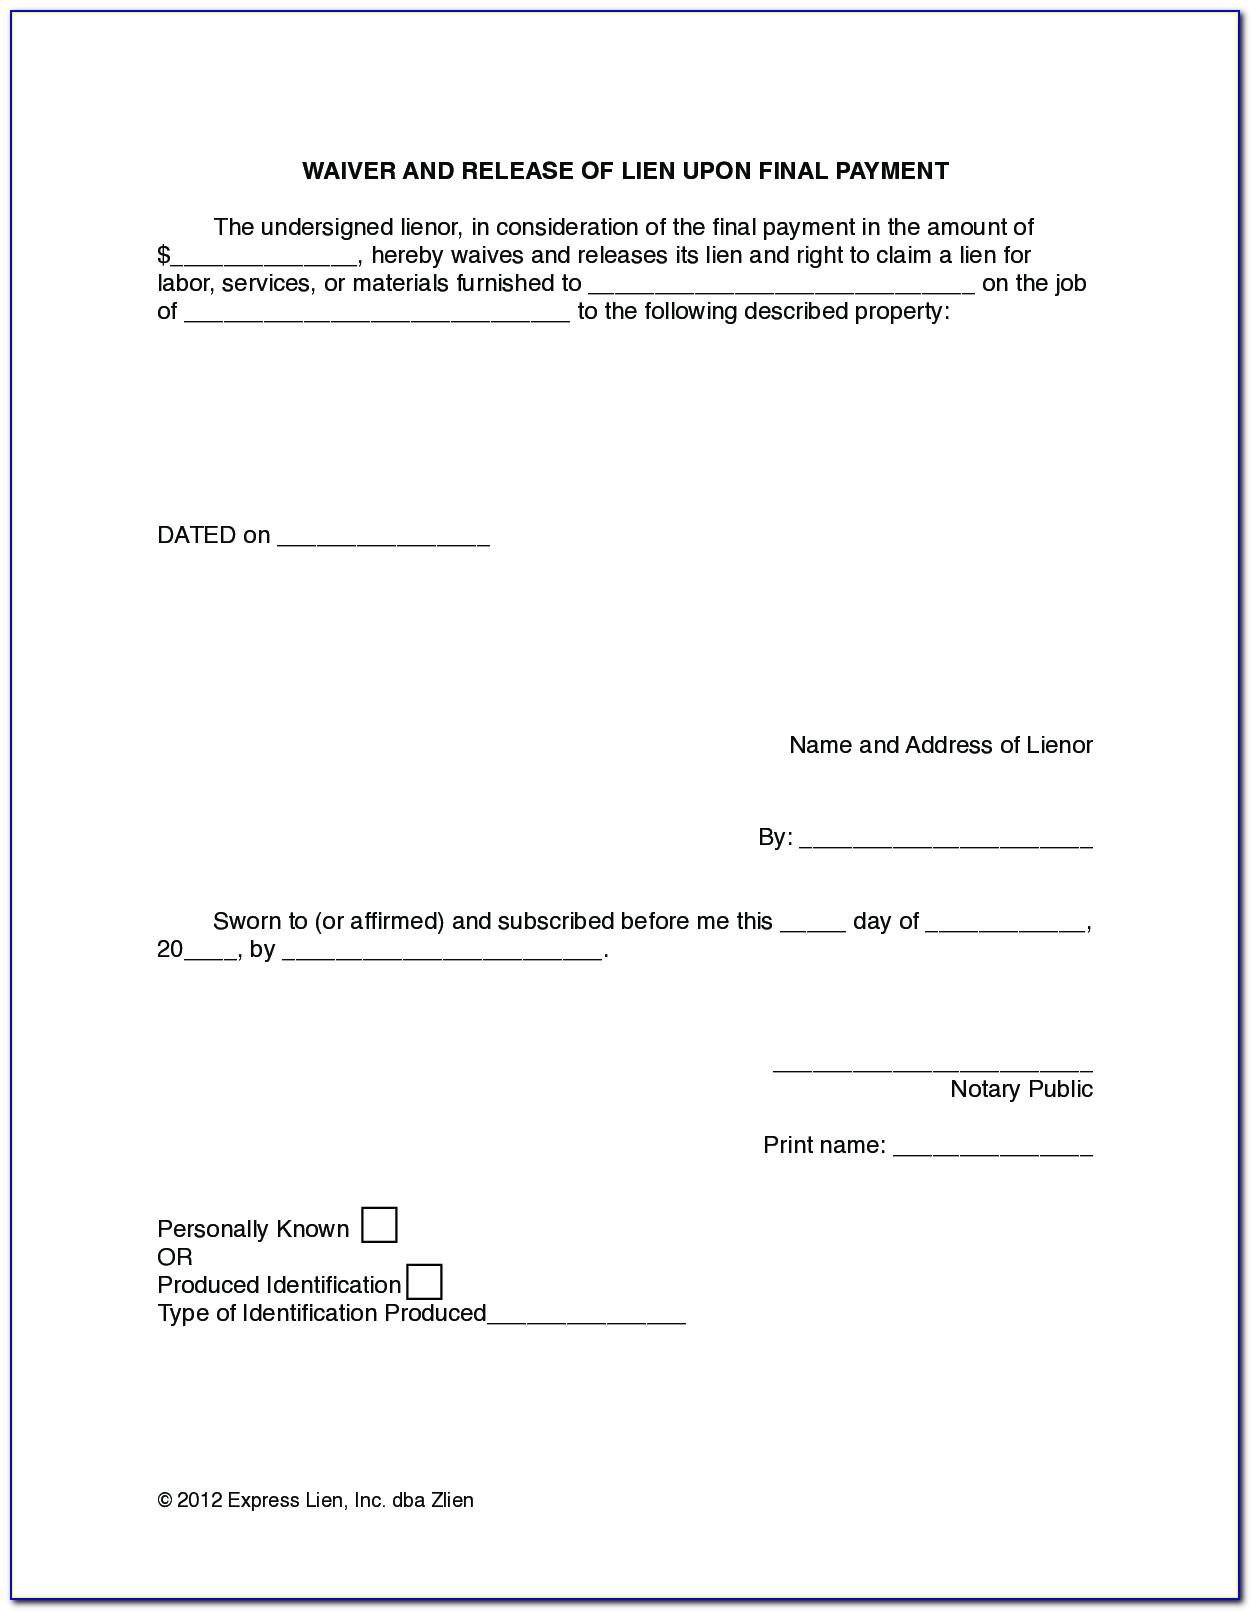 waiver-of-lien-form-michigan